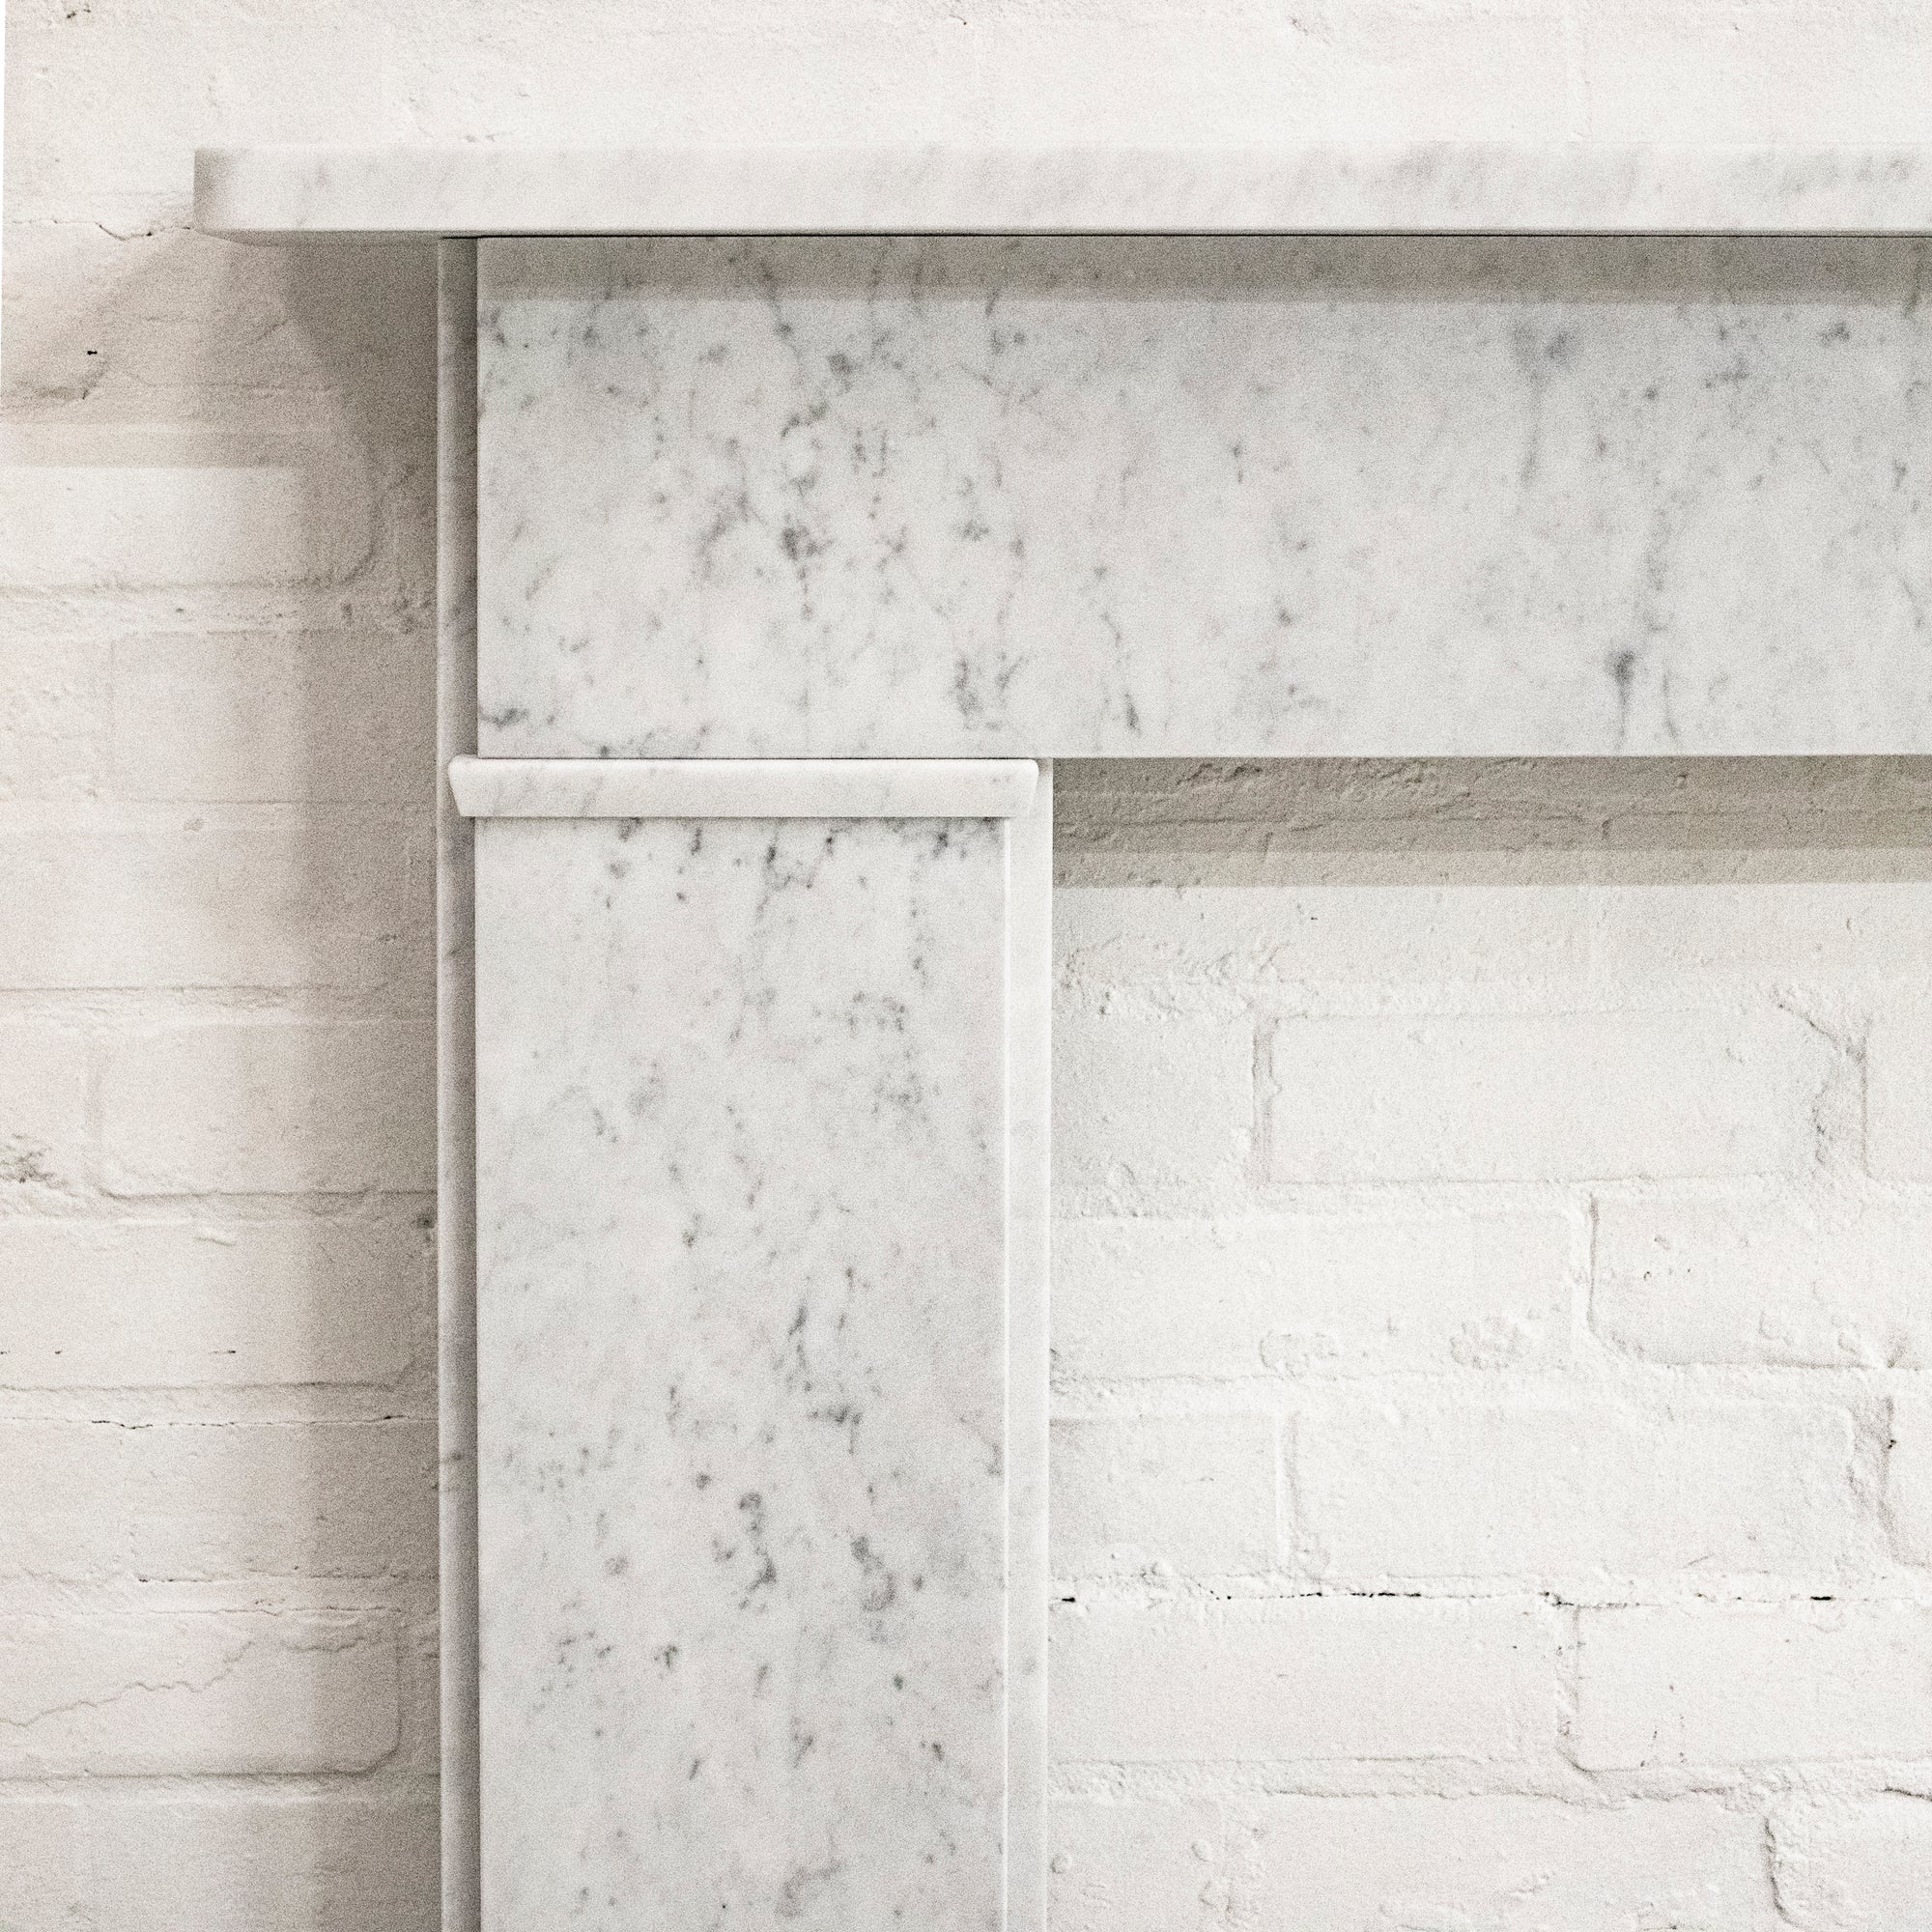 Early Edwardian, Late Georgian Style Carrara Marble Fire Surround | The Architectural Forum